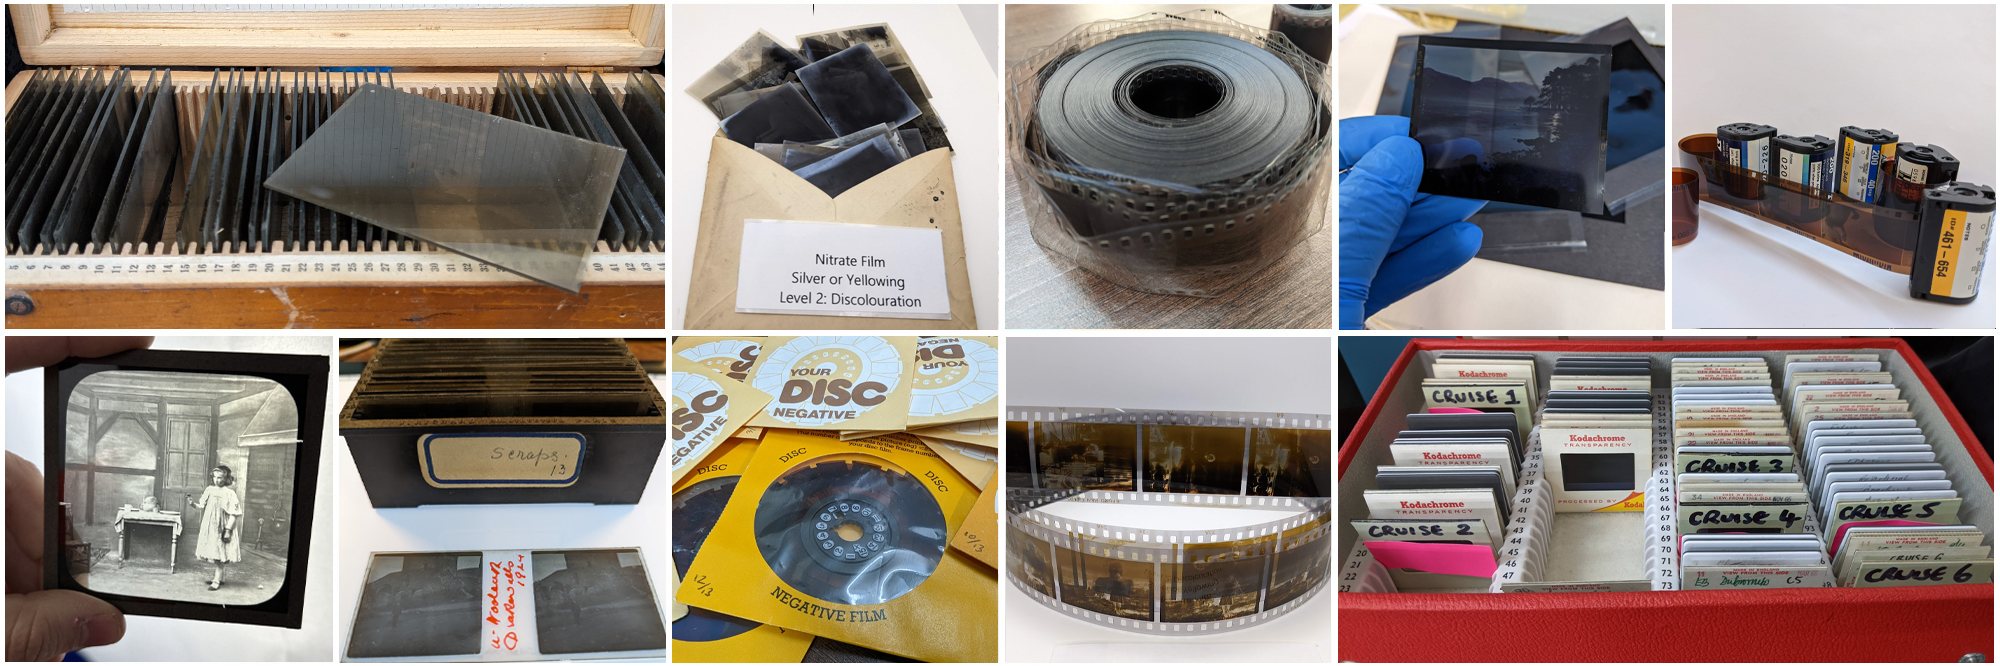 Photographic Film Types Digitised to TIFF and JPEG in Oxford UK